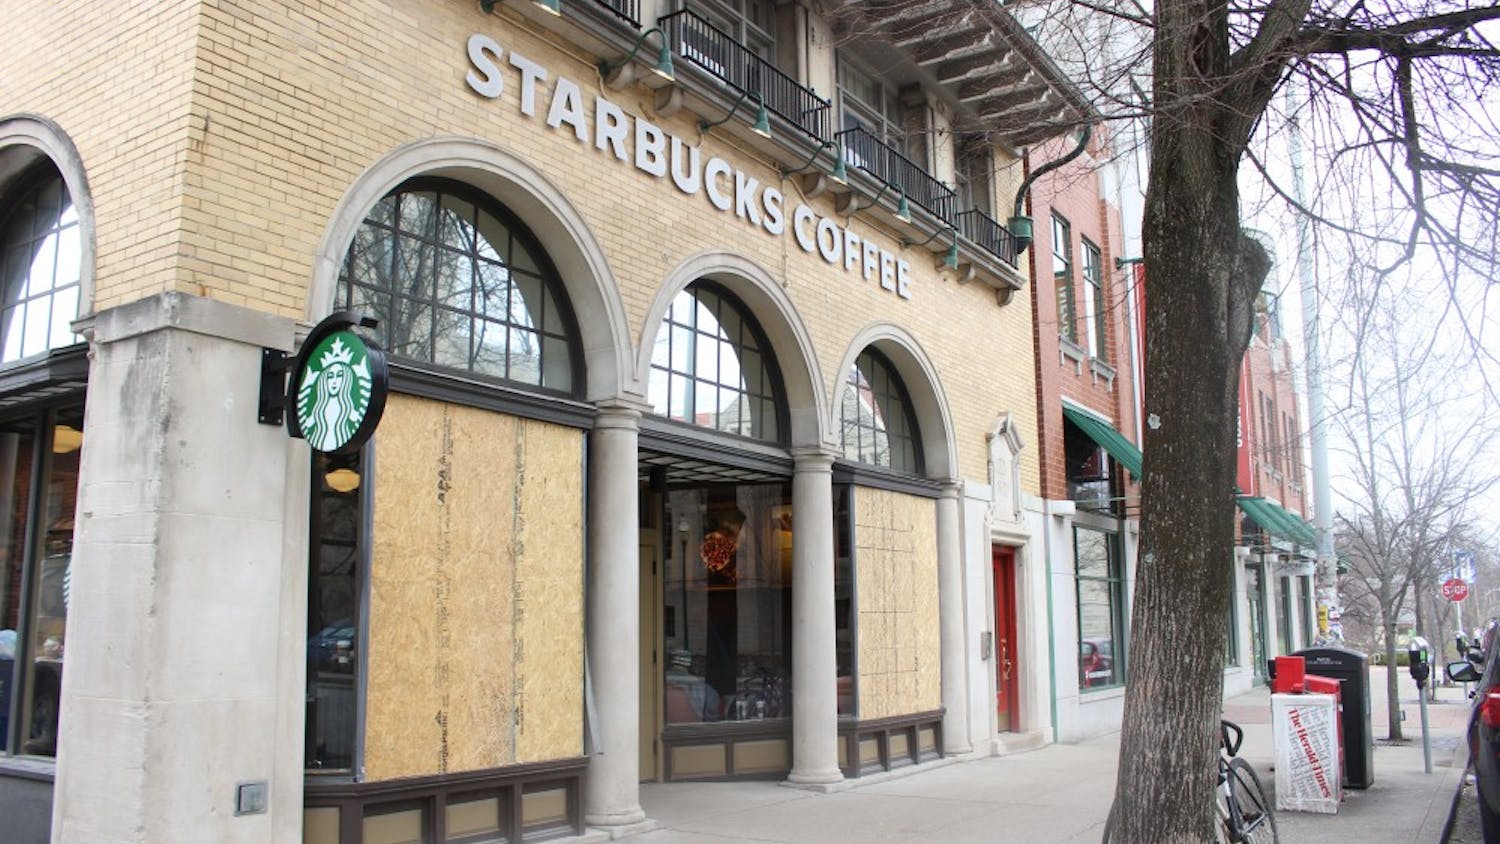 The Starbucks on Indiana Avenue has boarded up windows after rocks were thrown through the window on Sunday evening. Since surveillance cameras were not working at the time, the Bloomington Police Department has no leads.&nbsp;